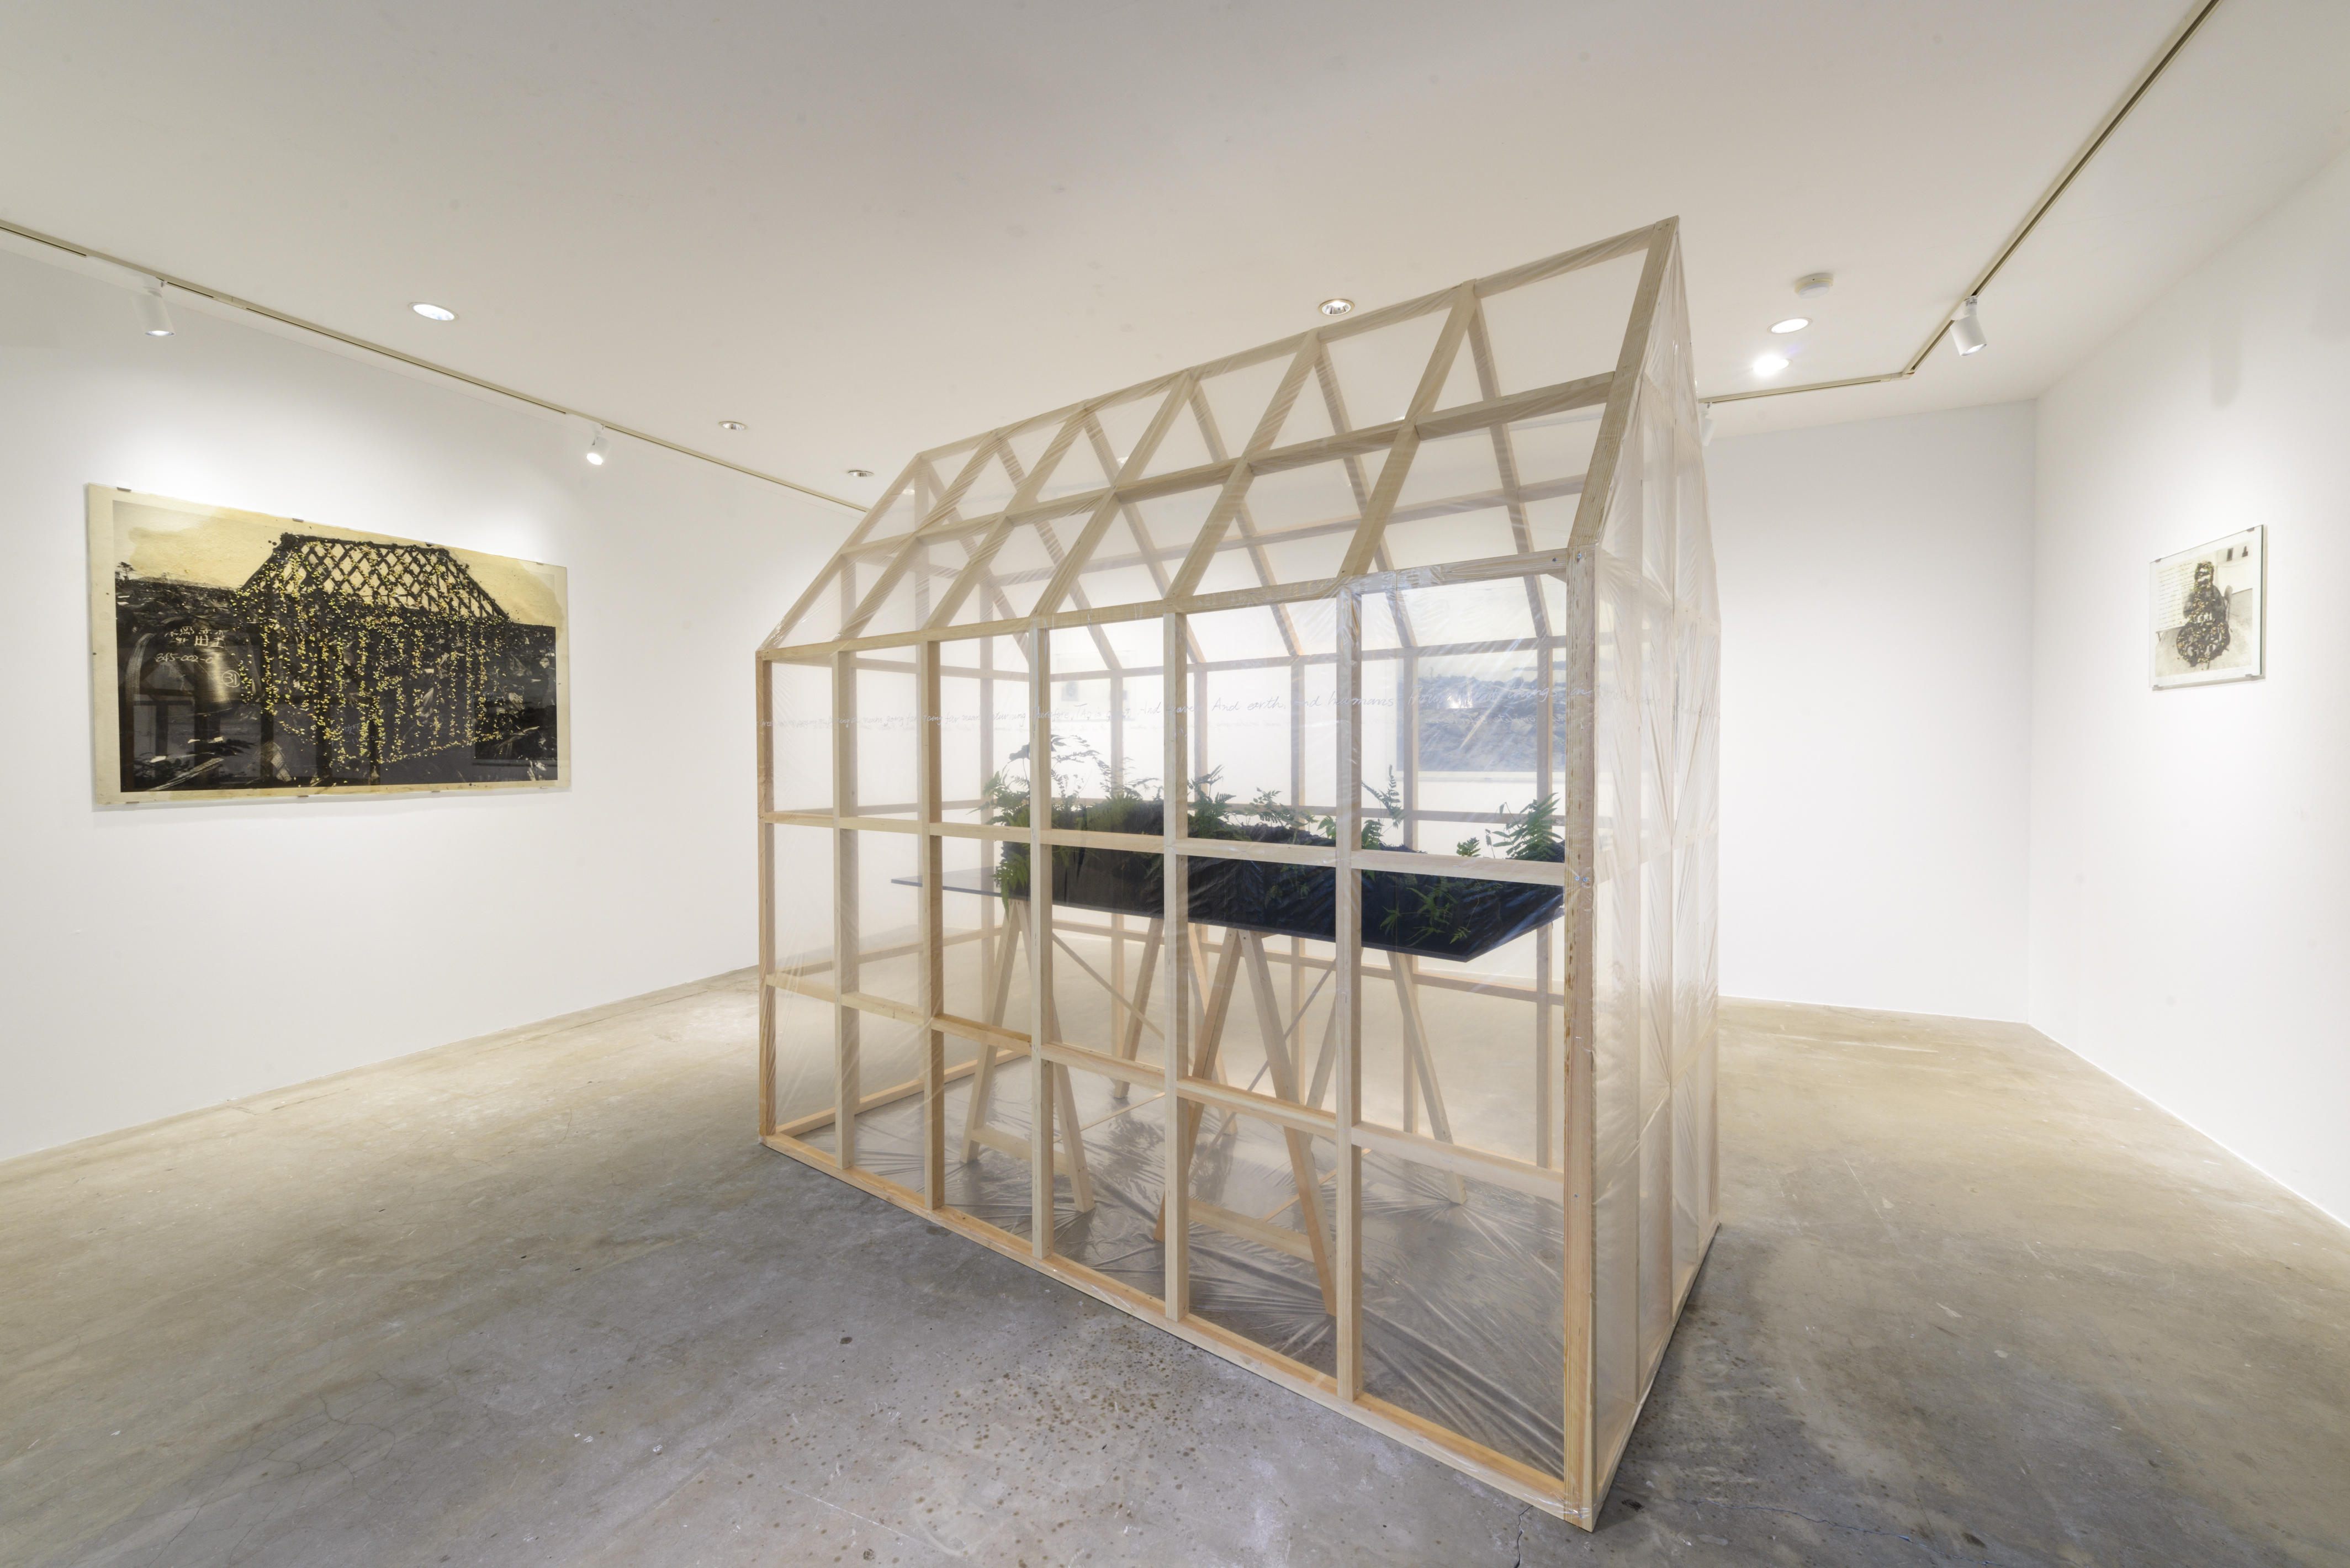 The installation view of solo show: DEBEYA in 2019